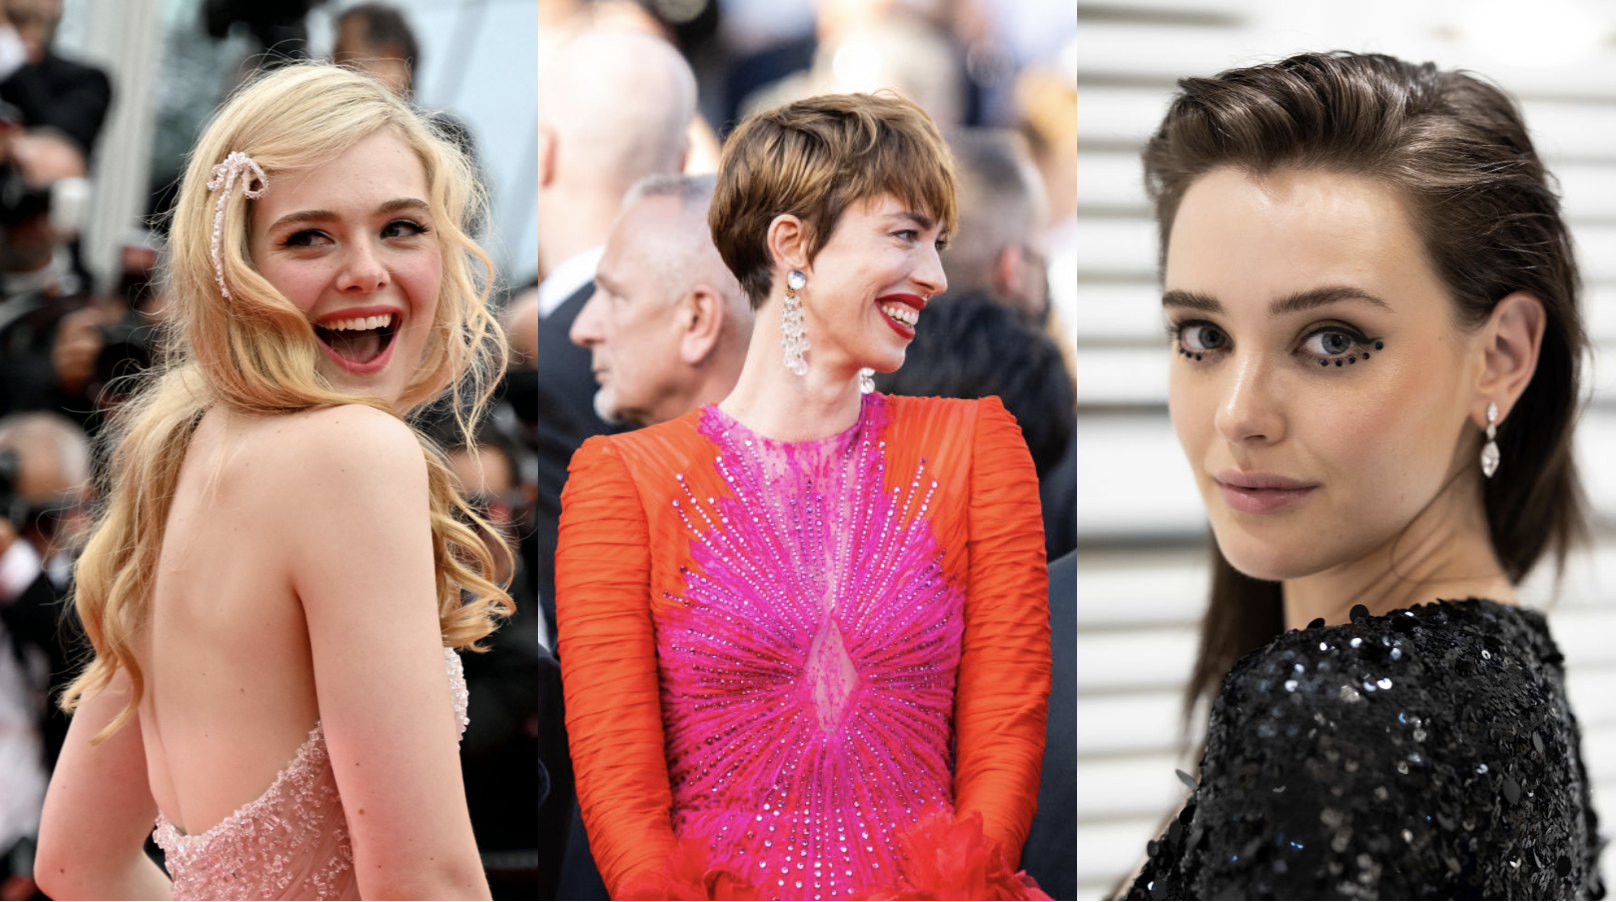 The Cannes Film Festival 2022: The Best Red Carpet Looks